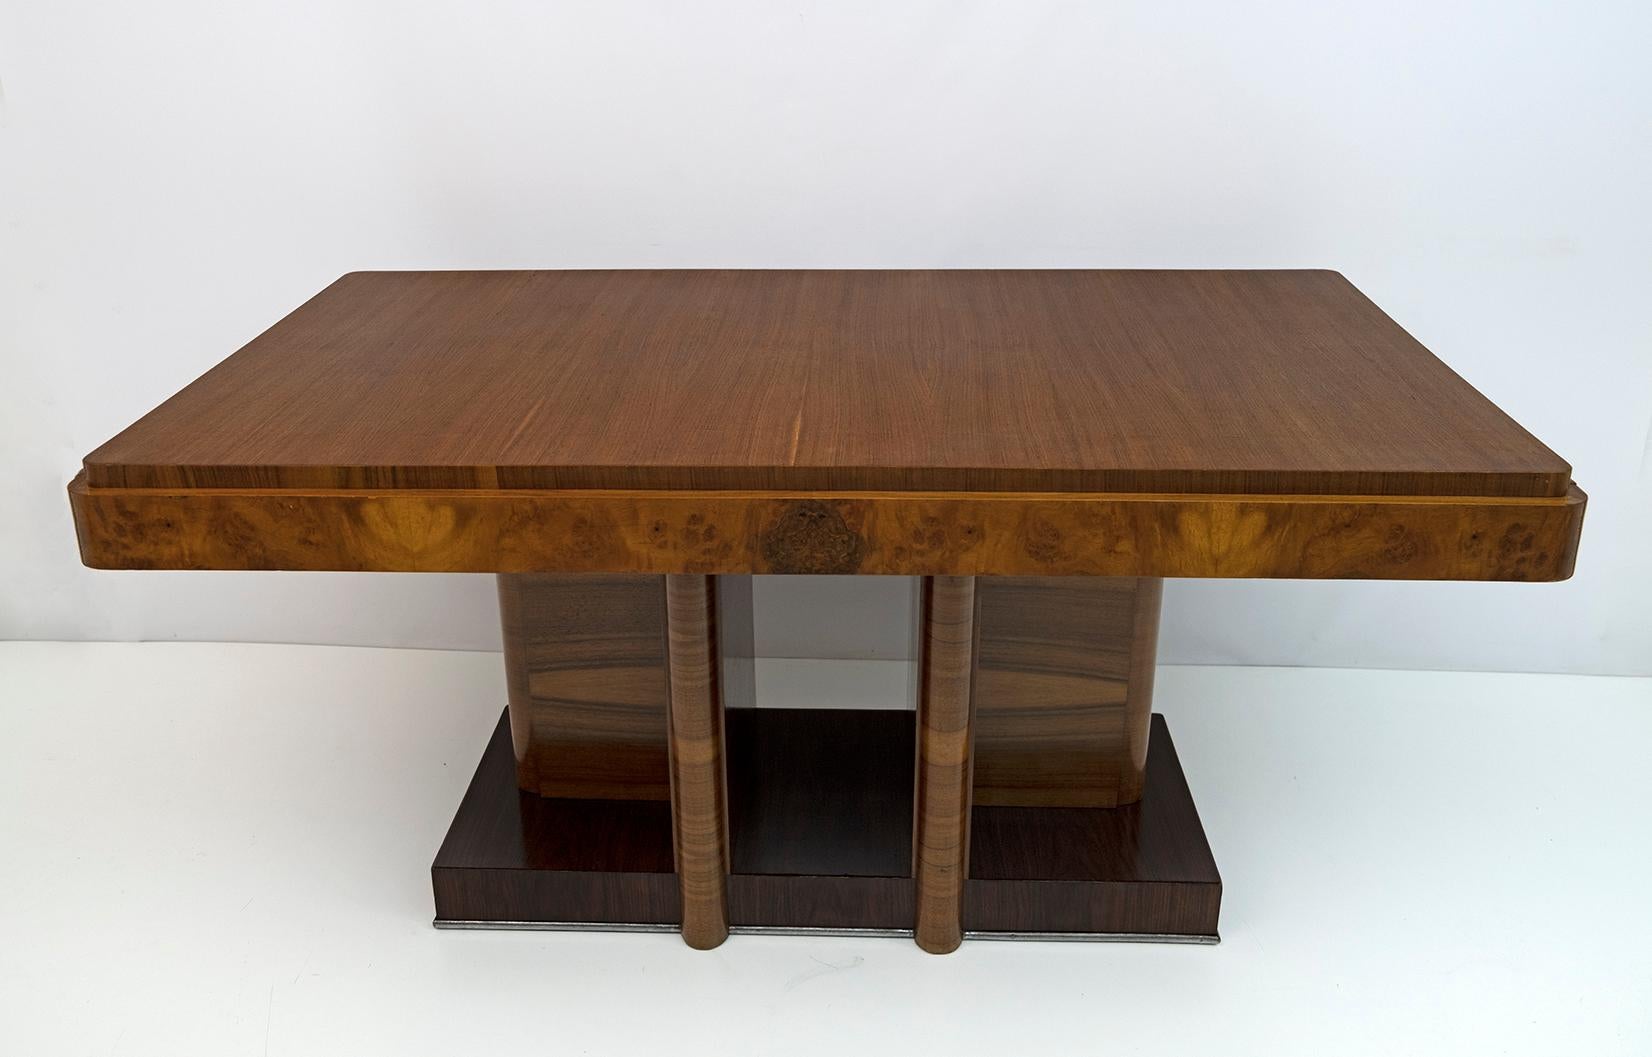 Art Deco dining table in walnut and briar,
Restored and polished with shellac, Italian production in the 1920s.
The table has two extensions and reaches, when open, the measure of 250 cm. The two extensions are in rough fir wood.